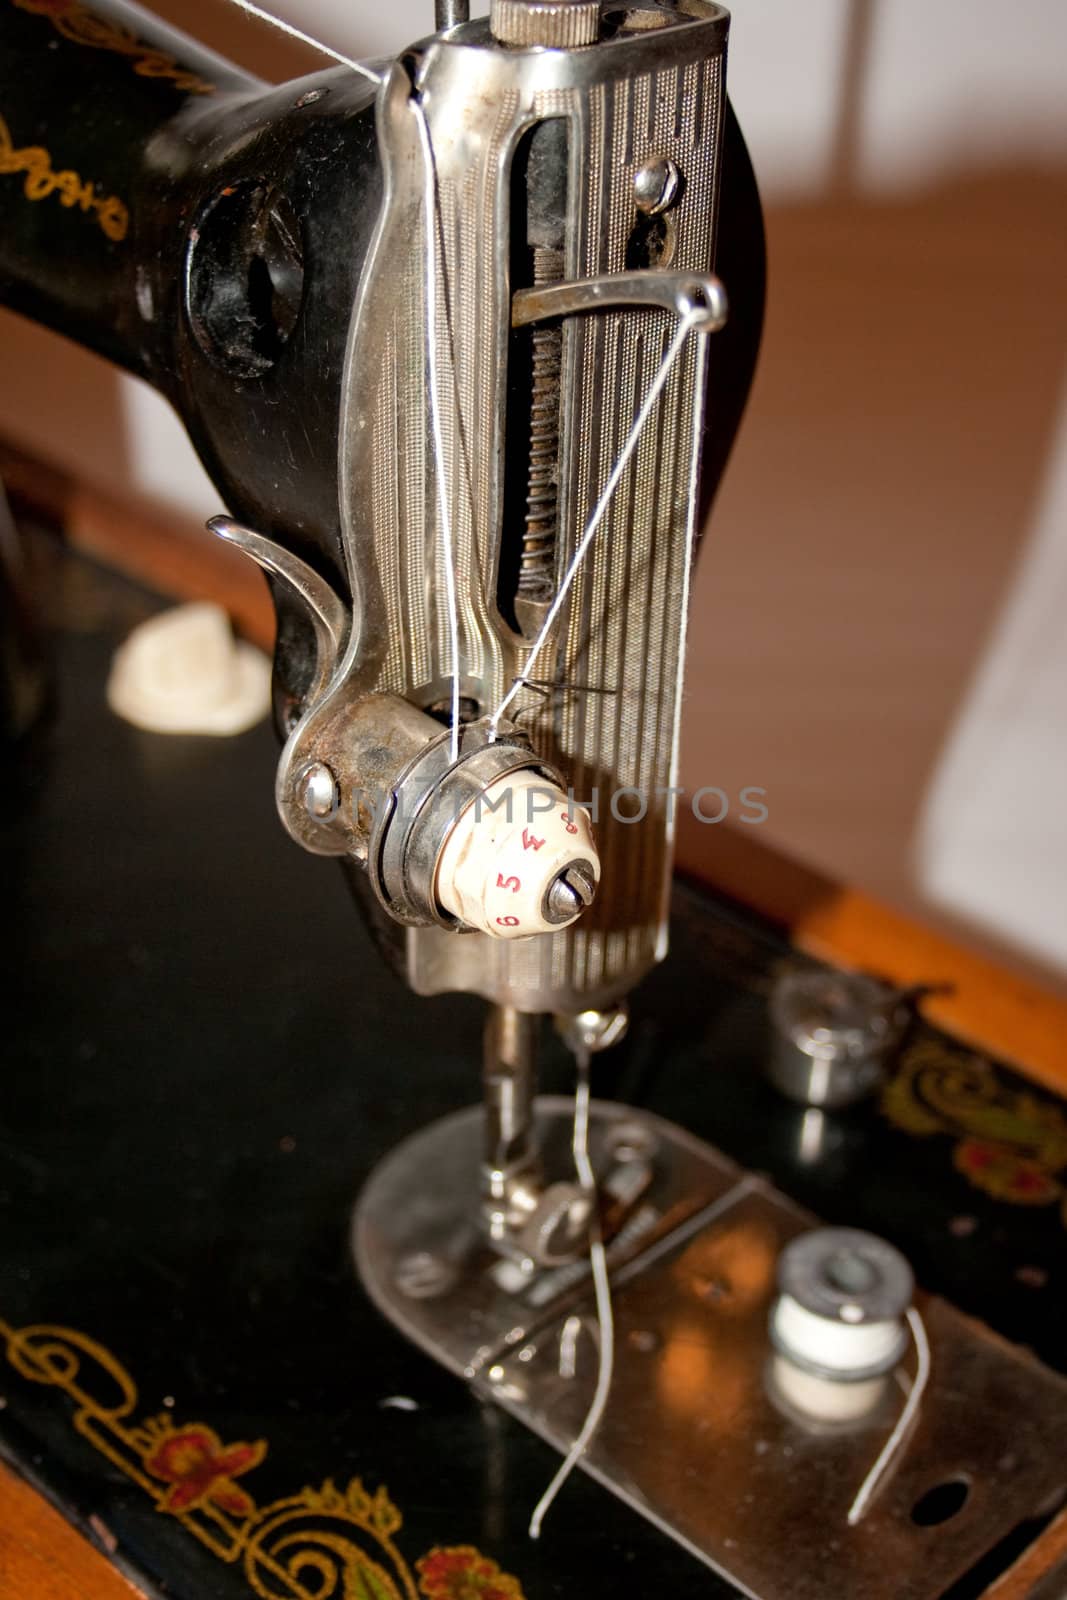 The antiquarian sewing-machine and hanks of threads